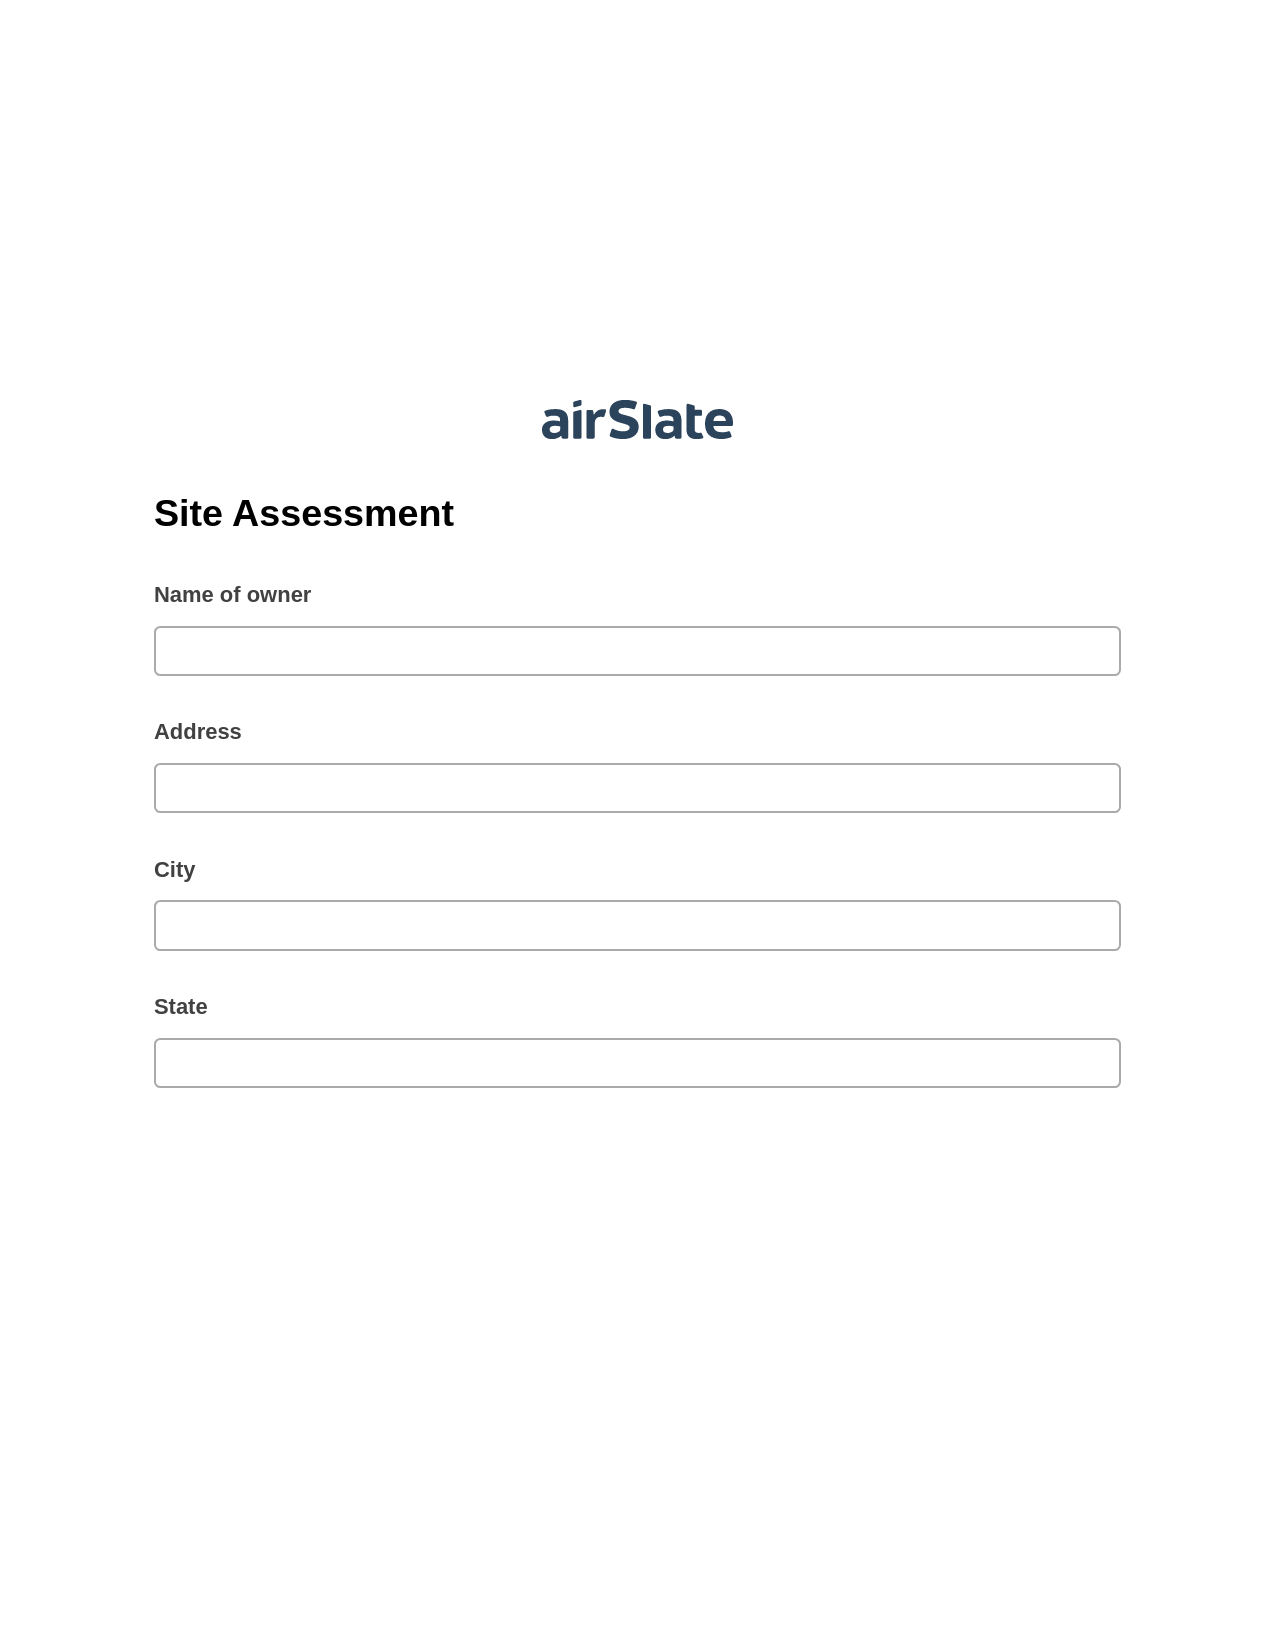 Site Assessment Pre-fill from Google Sheets Bot, Reminder Bot, Export to Excel 365 Bot